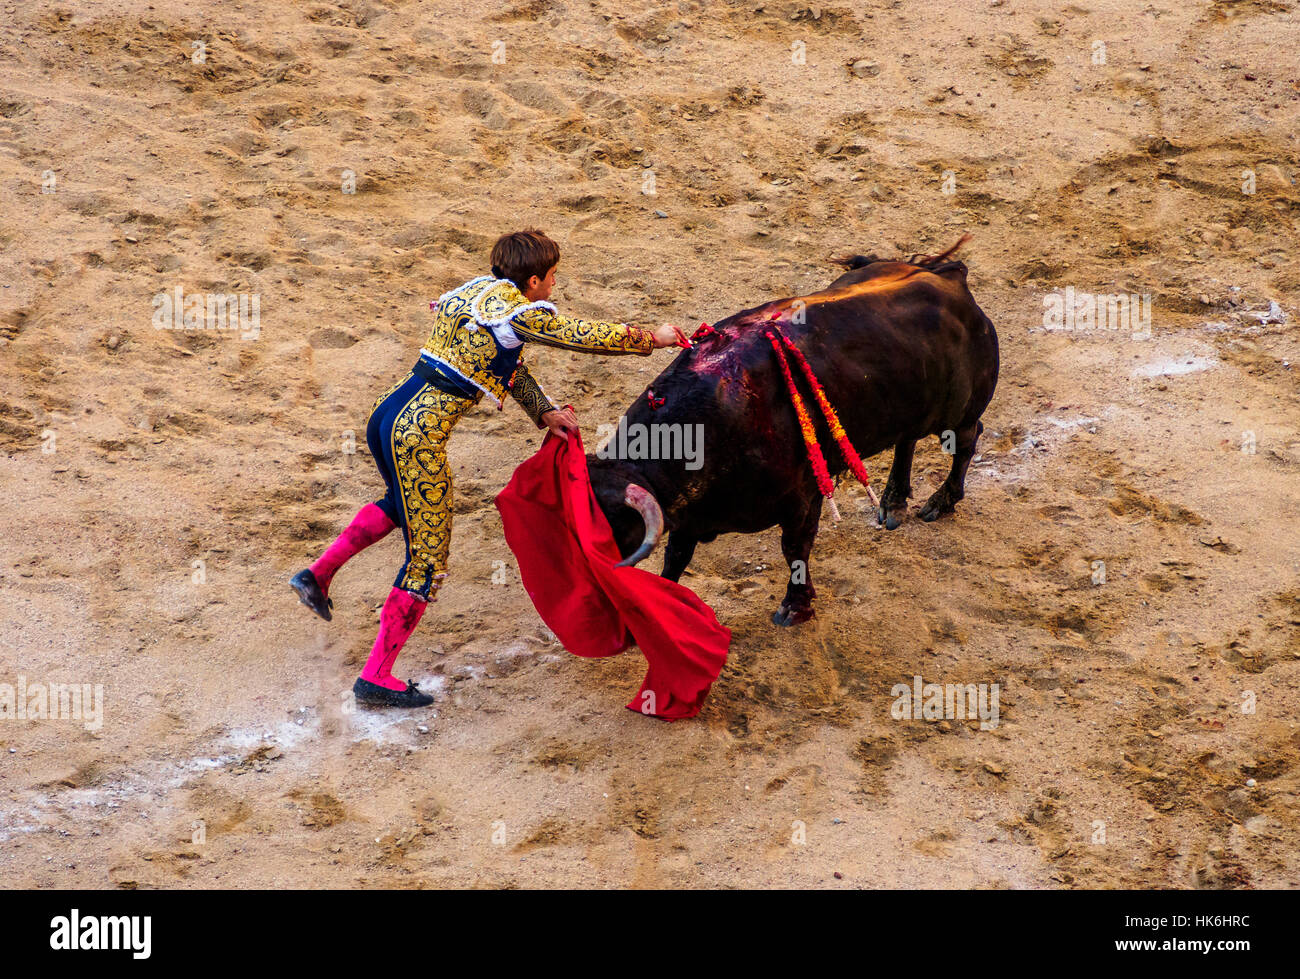 Bullfighter Stabs Young Bull With Spear Red Cape Muleta Bull With Three Spears In Back Bullfighting Arena Torero Matador Stock Photo Alamy